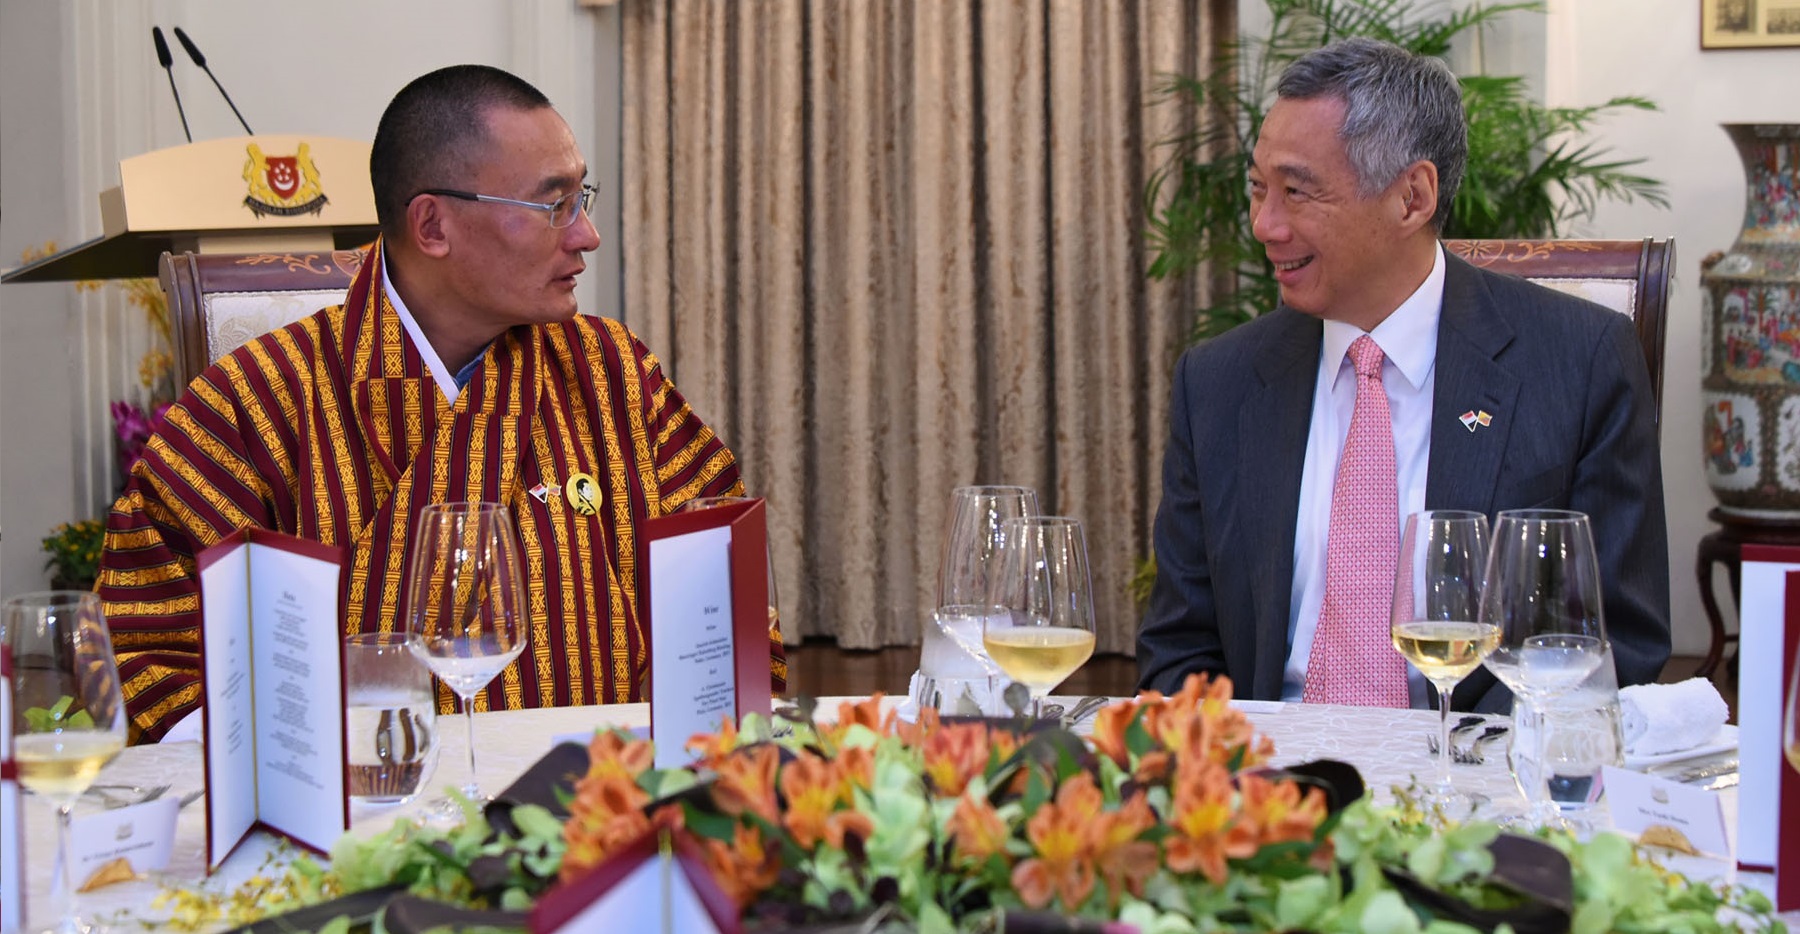 PM Lee Hsien Loong at the Official Lunch Hosted in Honour of Bhutan PM Tshering Tobgay